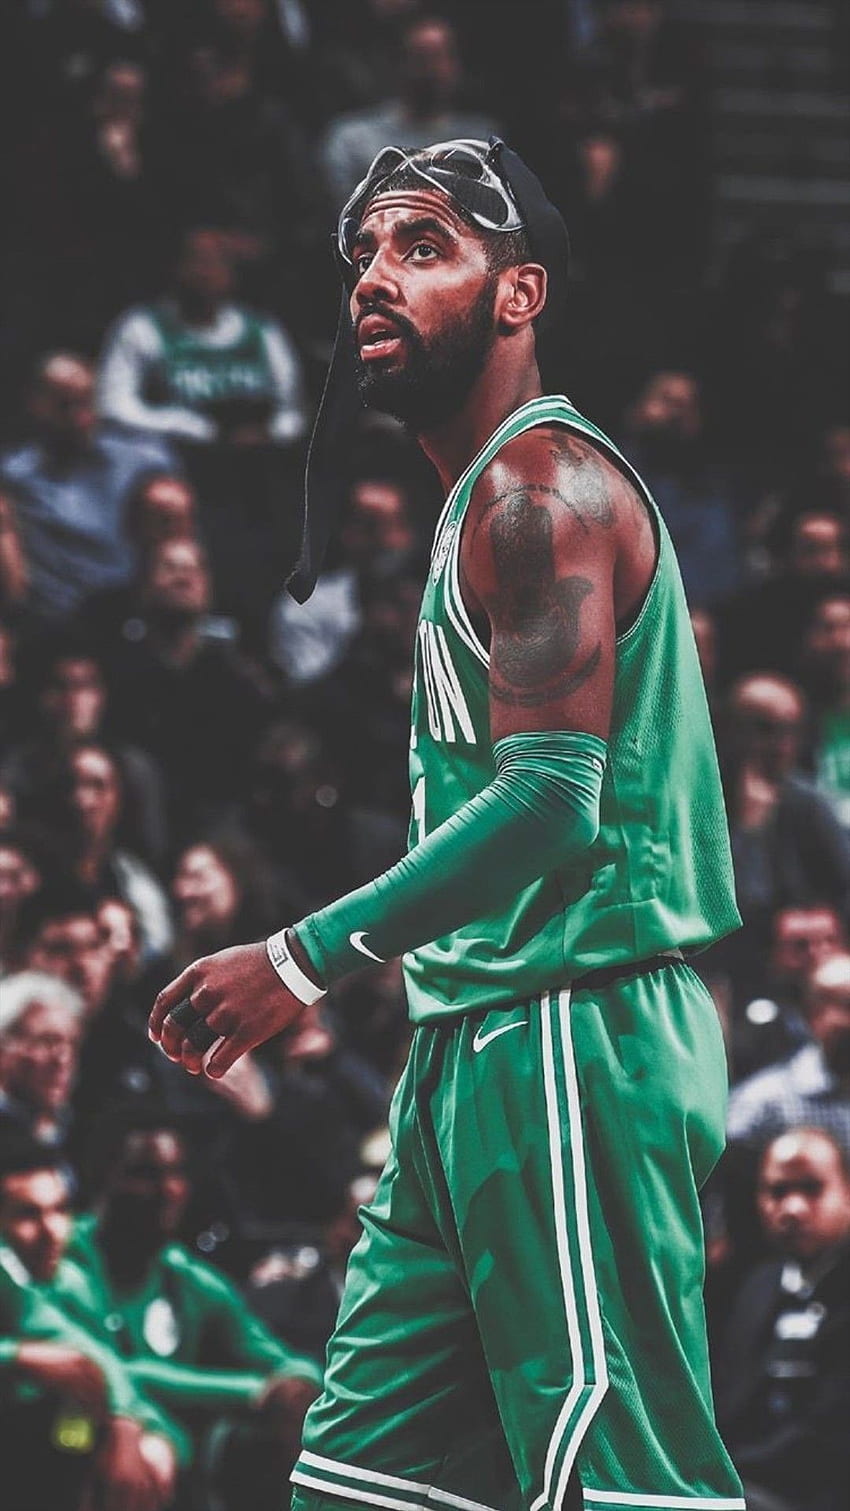 HoopsWallpapers.com – Get the latest HD and mobile NBA wallpapers today!  Kyrie Irving Archives - HoopsWallpapers.com - Get the latest HD and mobile  NBA wallpapers today!